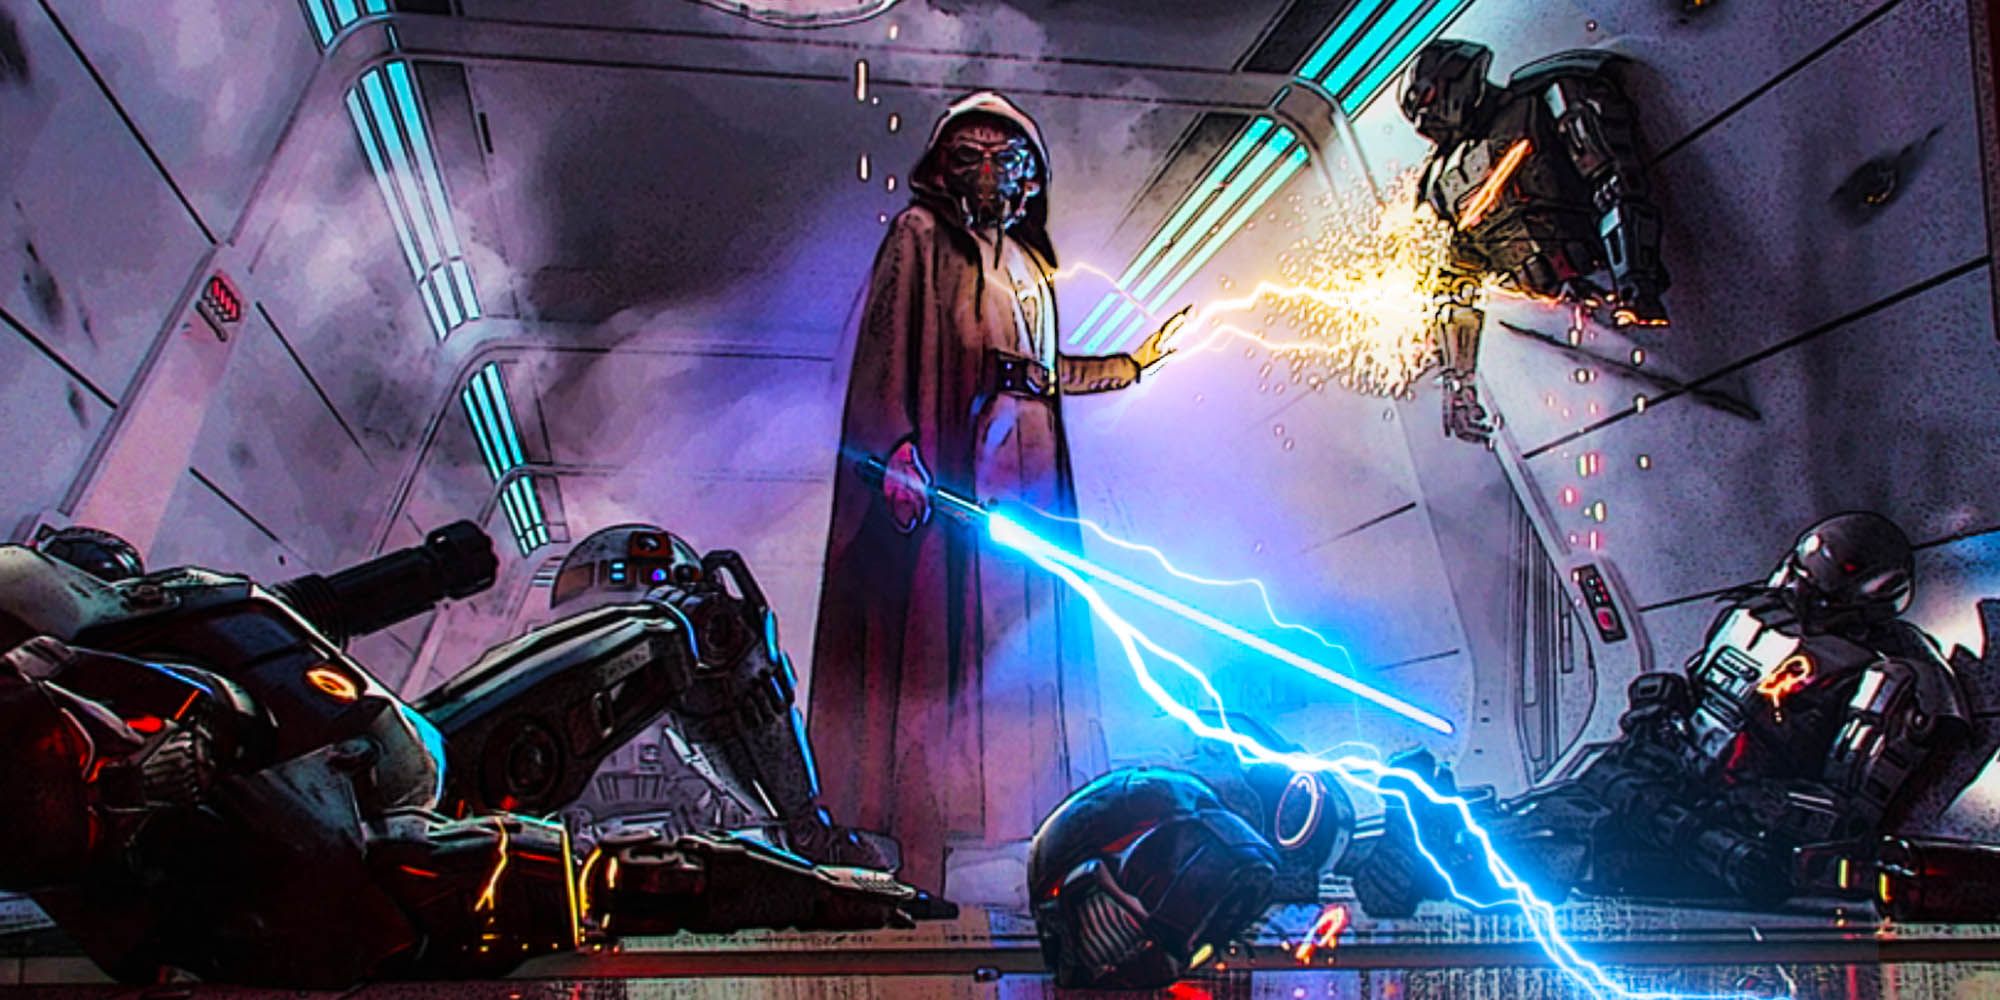 Star Wars Powers: What the Light Side Allows a Jedi to Do